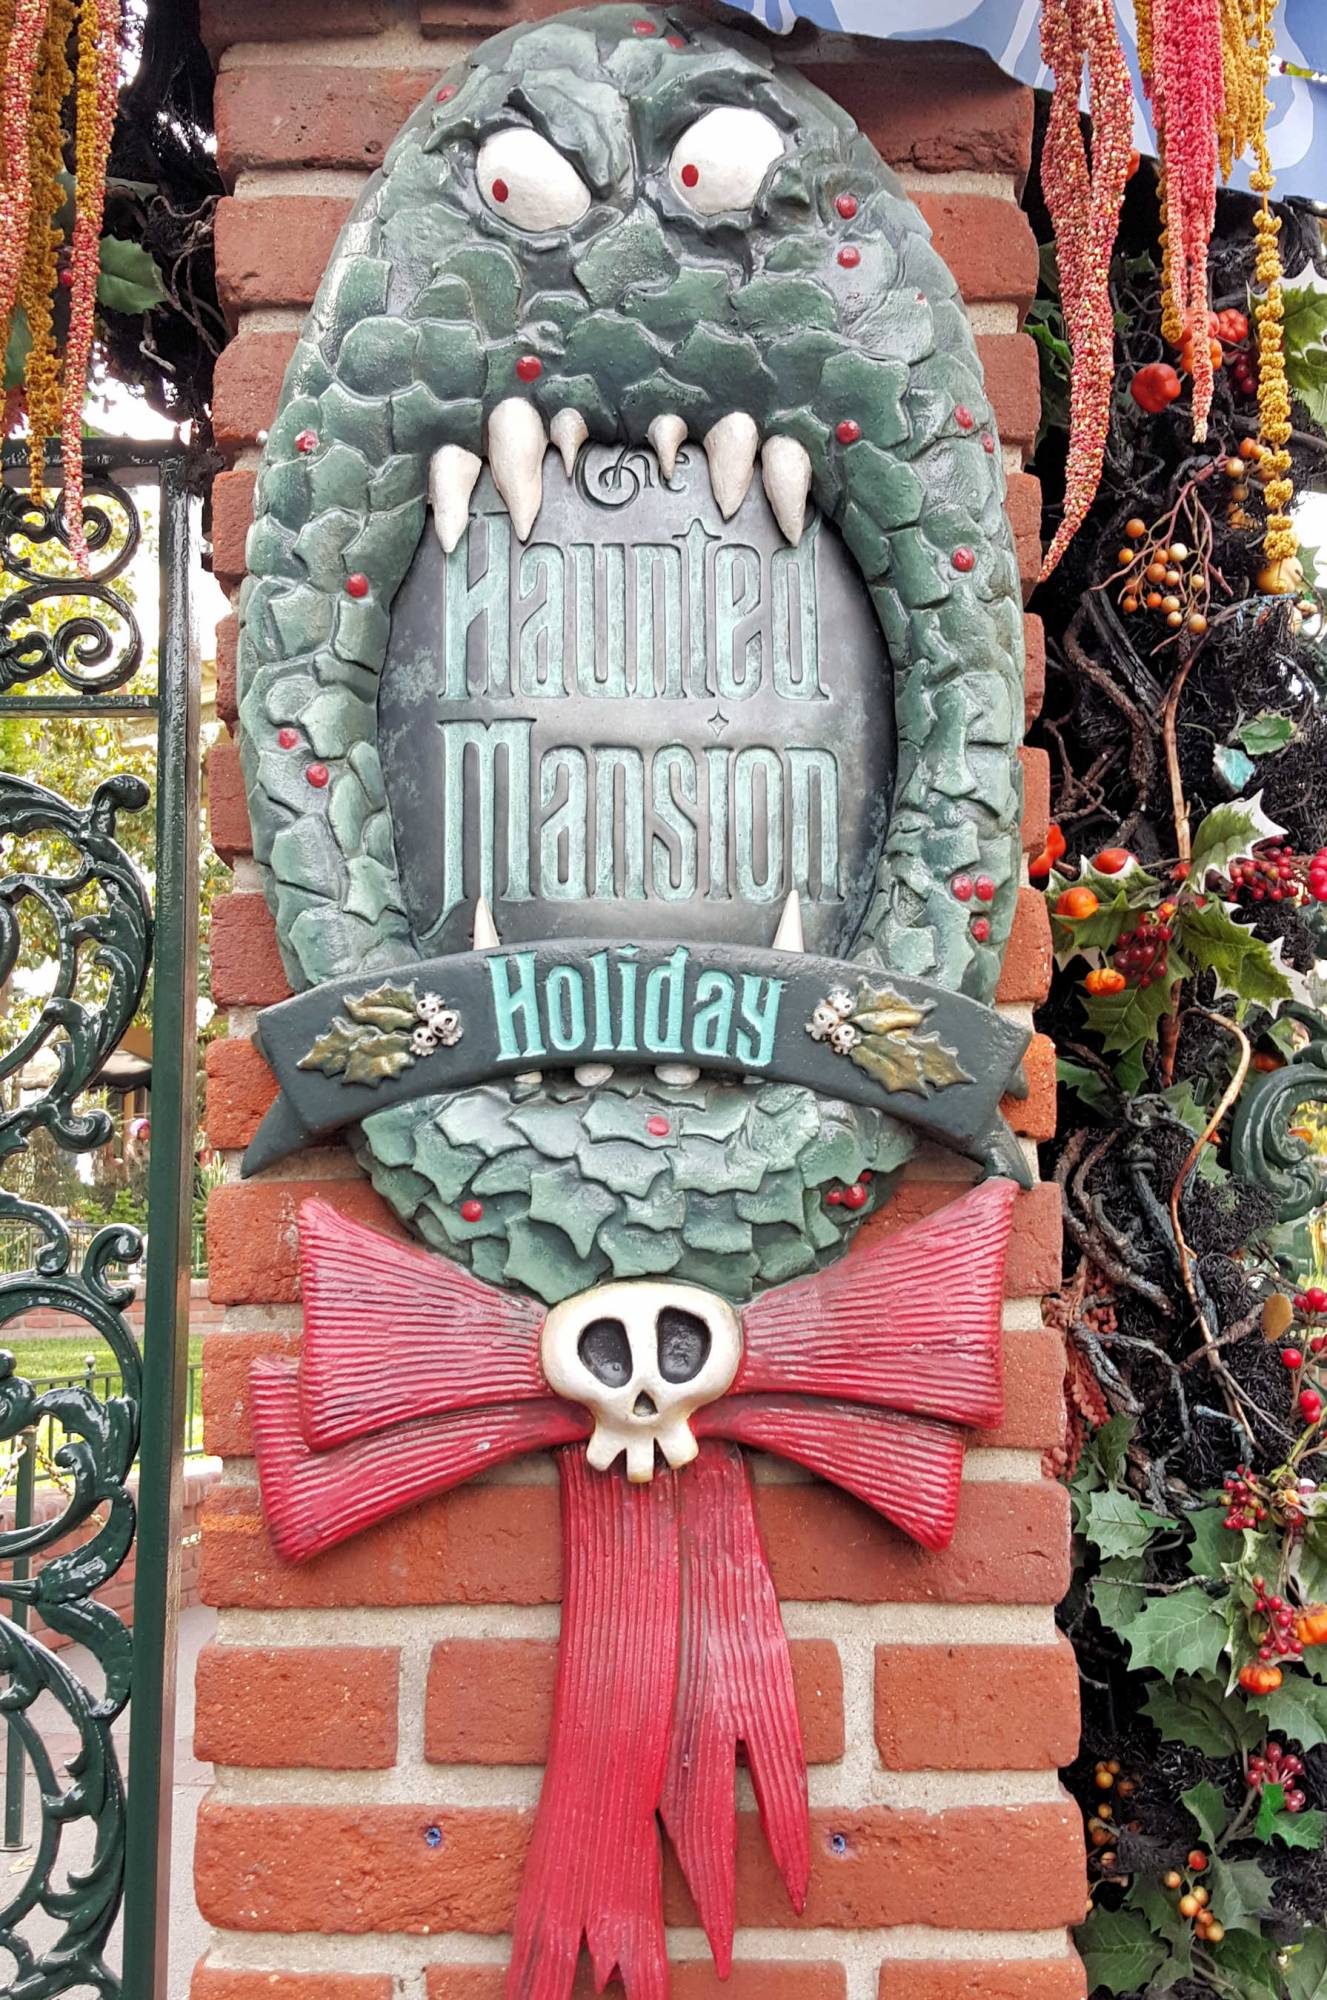 Disneyland New Orleans Square Haunted Mansion holiday sign